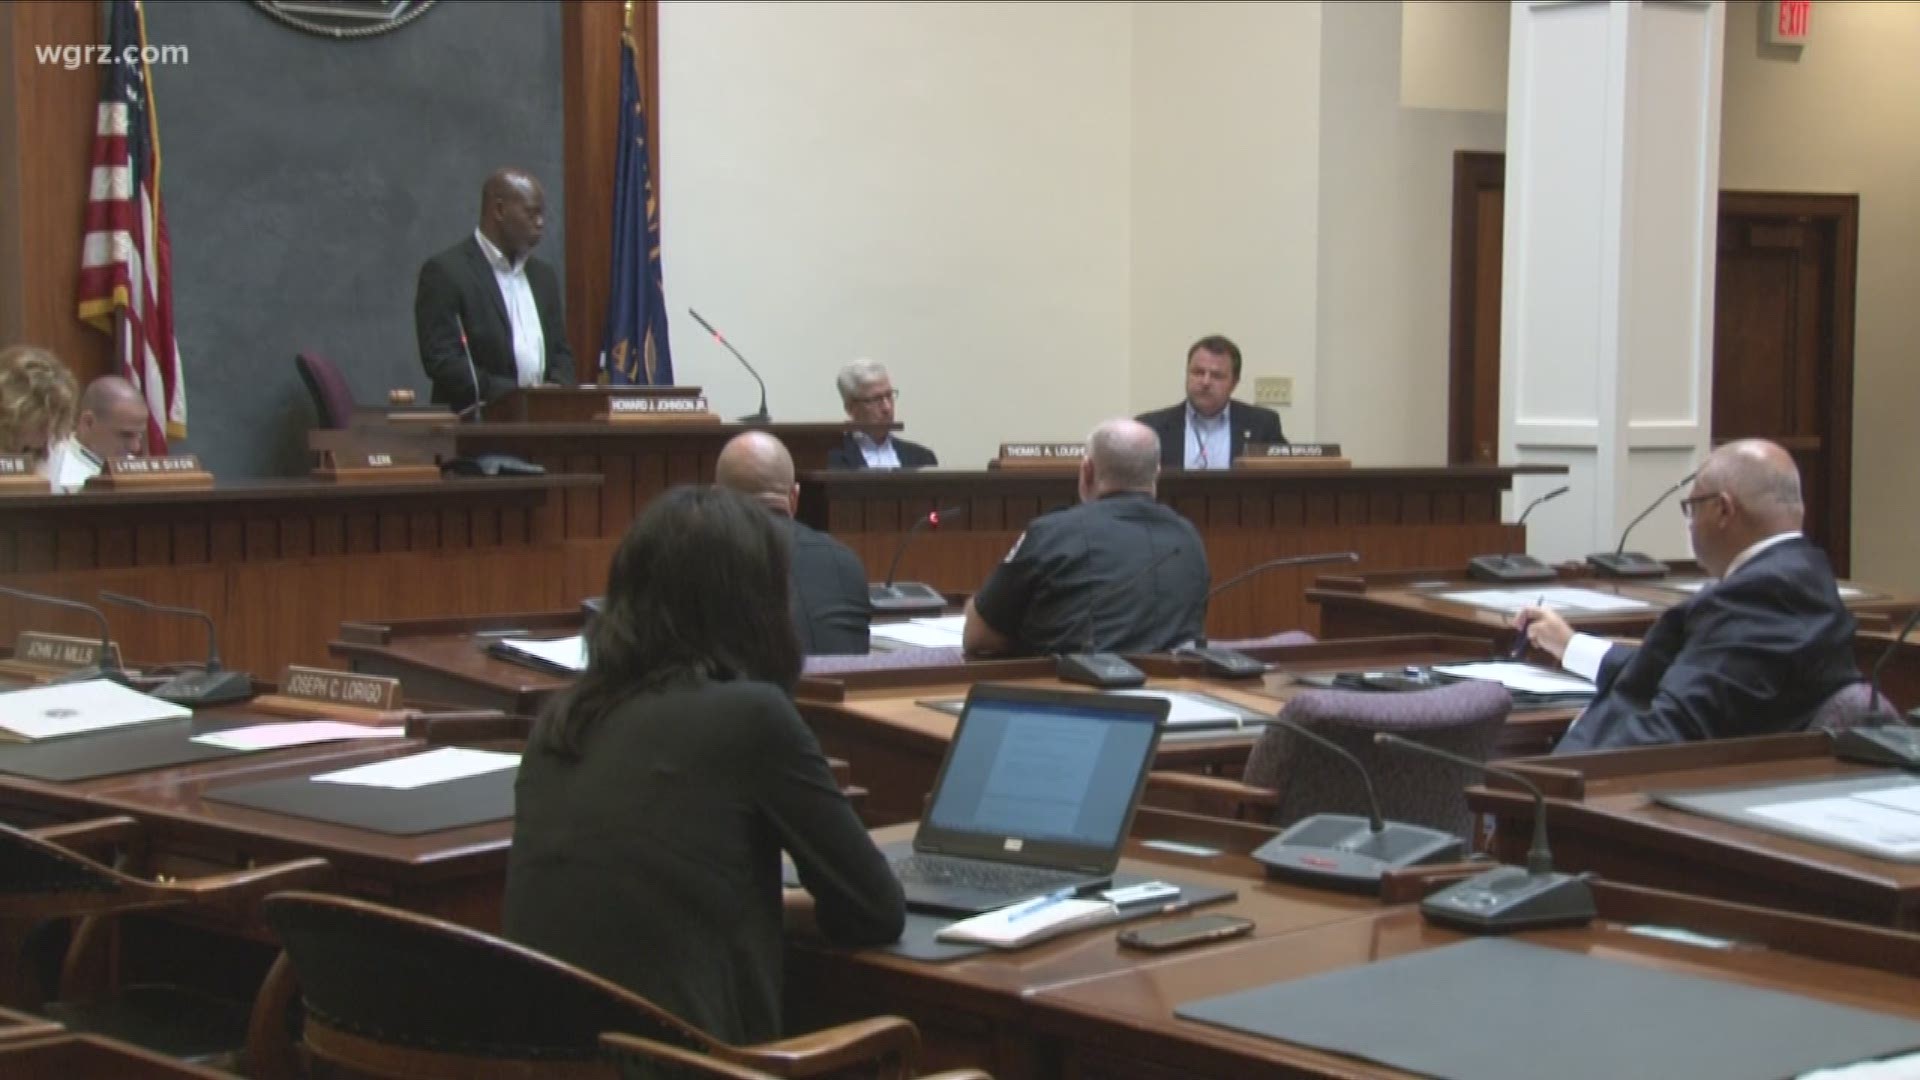 A tense public hearing at the Erie County Legislature ended in a stalemate as lawmakers discussed a proposed board that would oversee the operations of the Erie County Jail.